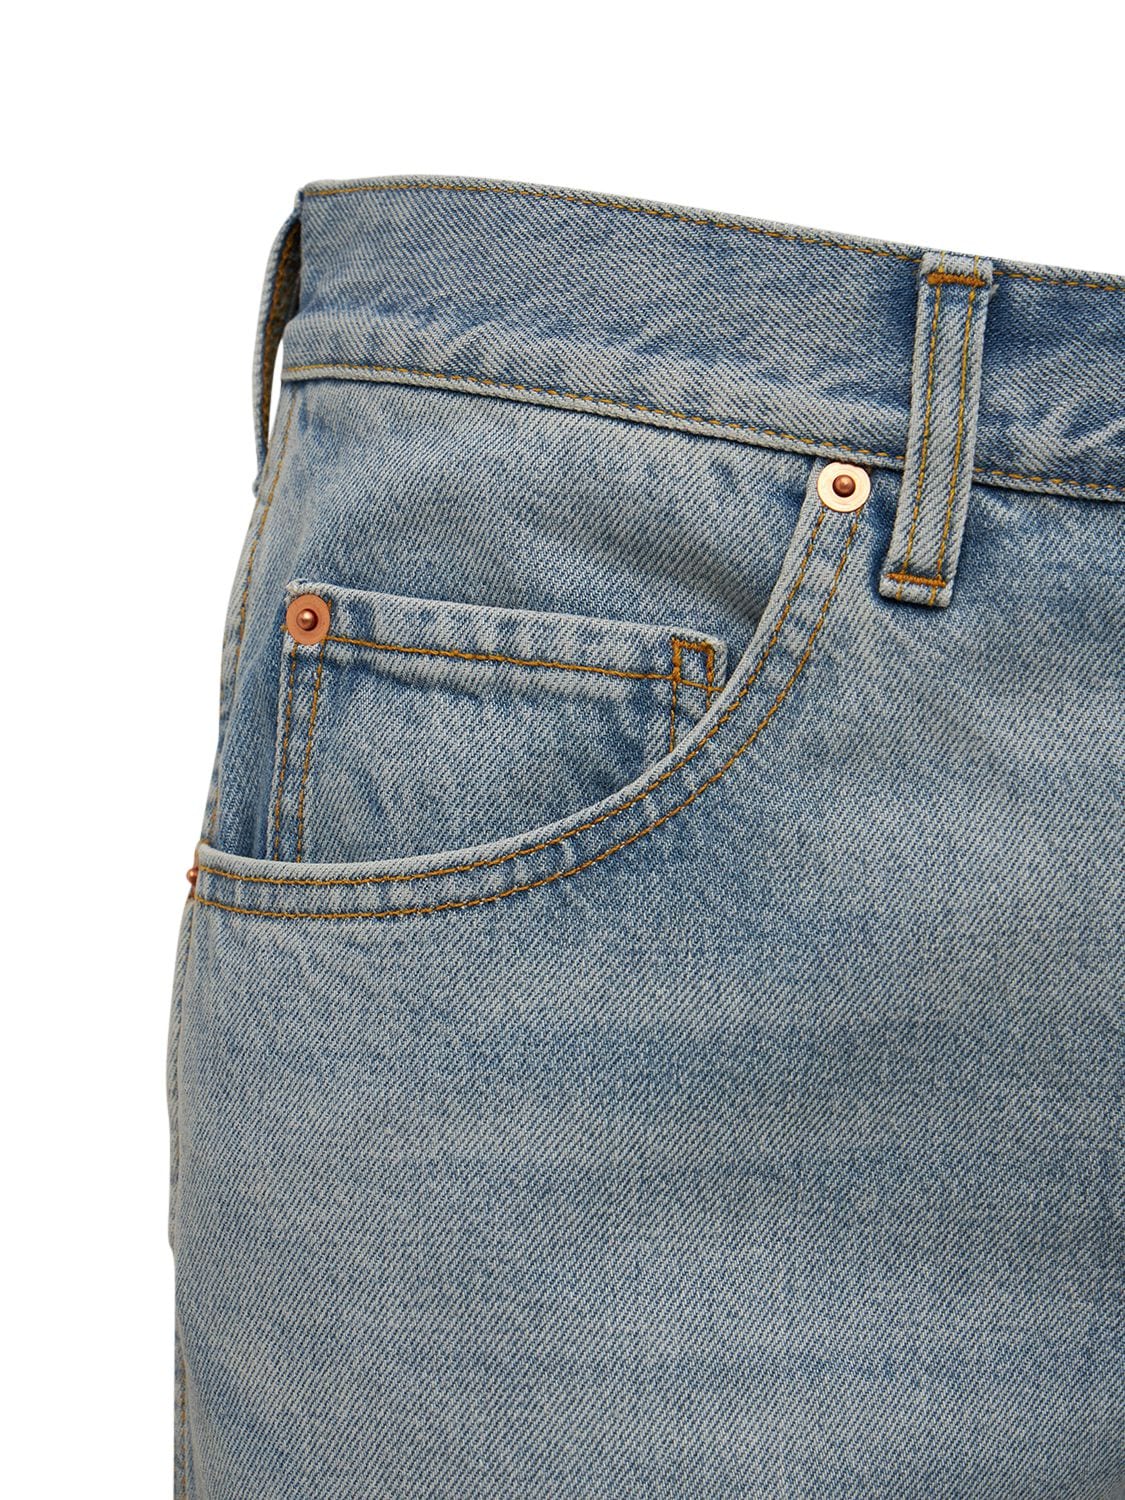 Shop Gucci Tapered Cotton Denim Jeans In Blue